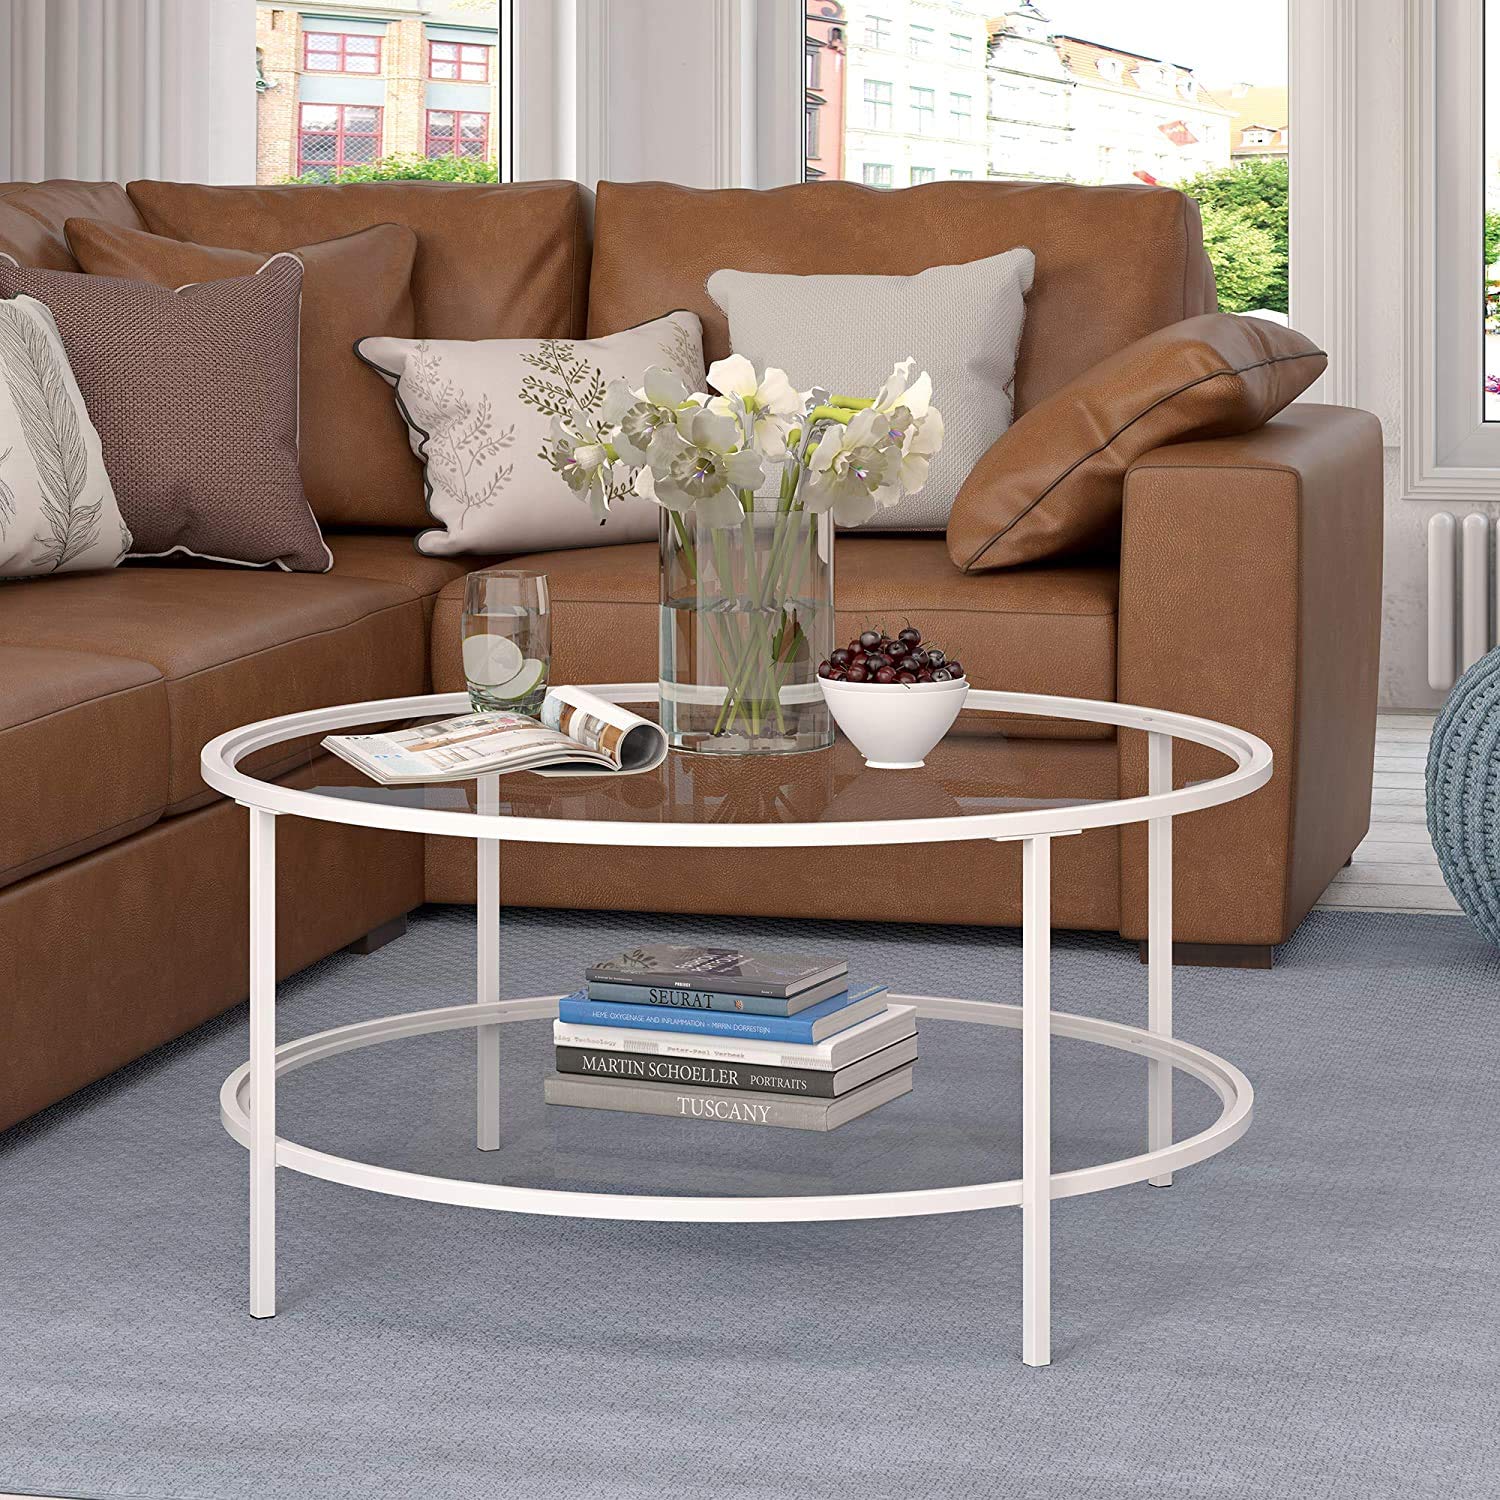 INDIAN DÉCOR 45379 Round coffee table